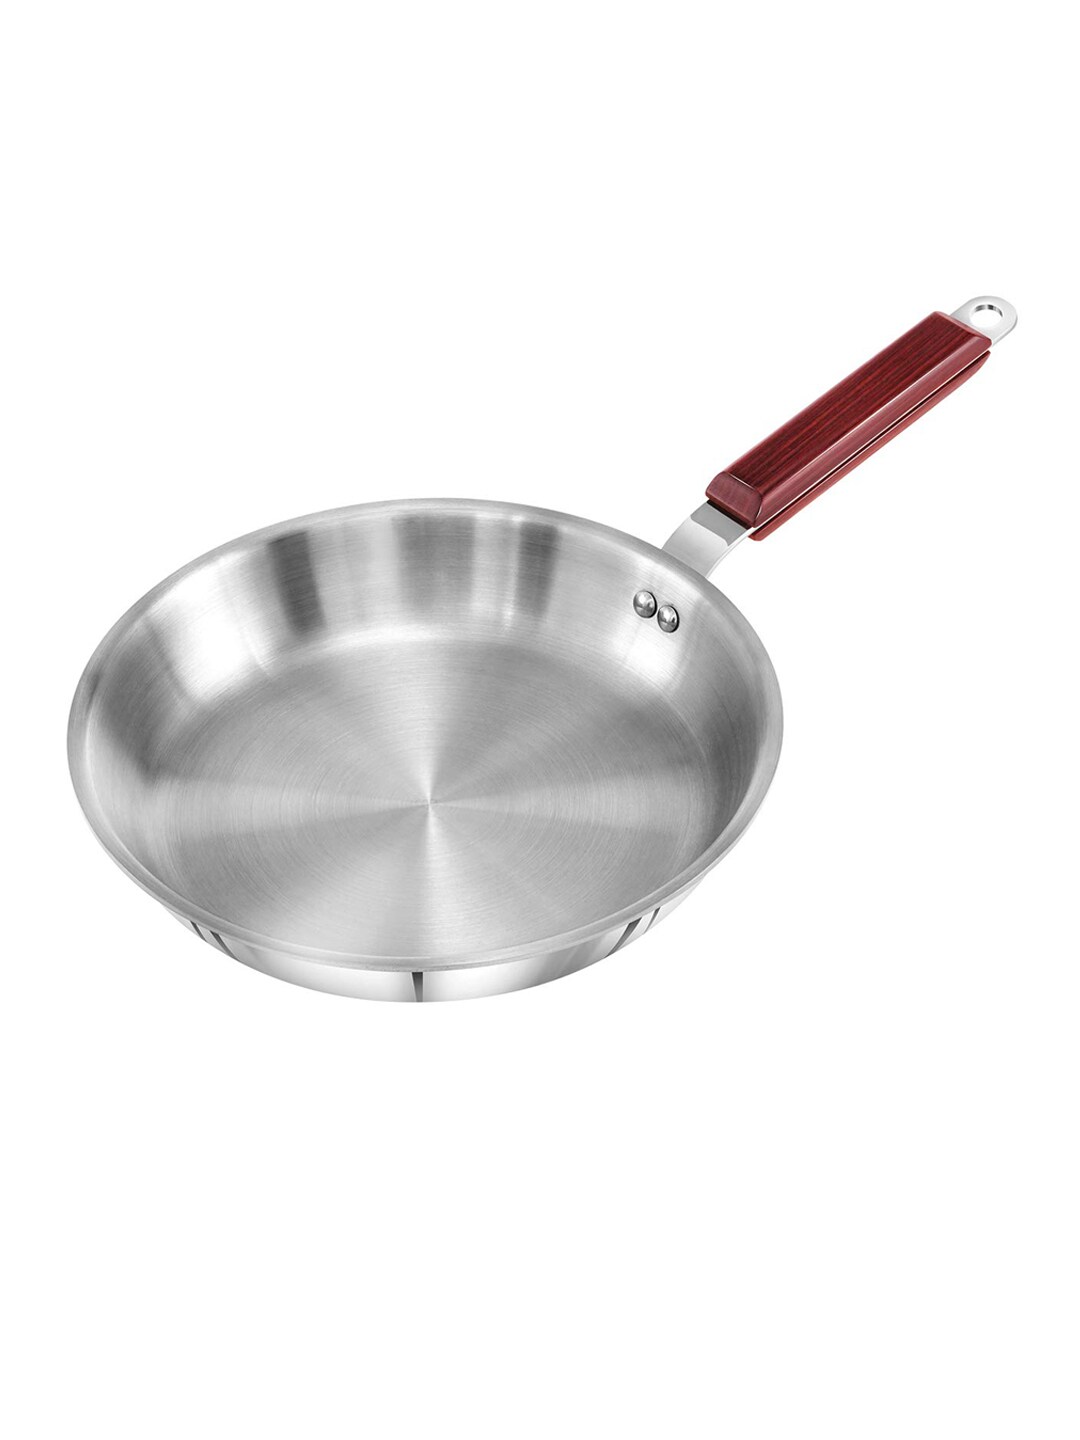 Hawkins Silver-Toned & Red Triply 3 mm Extra-Thick Stainless Steel Frying Pan Price in India